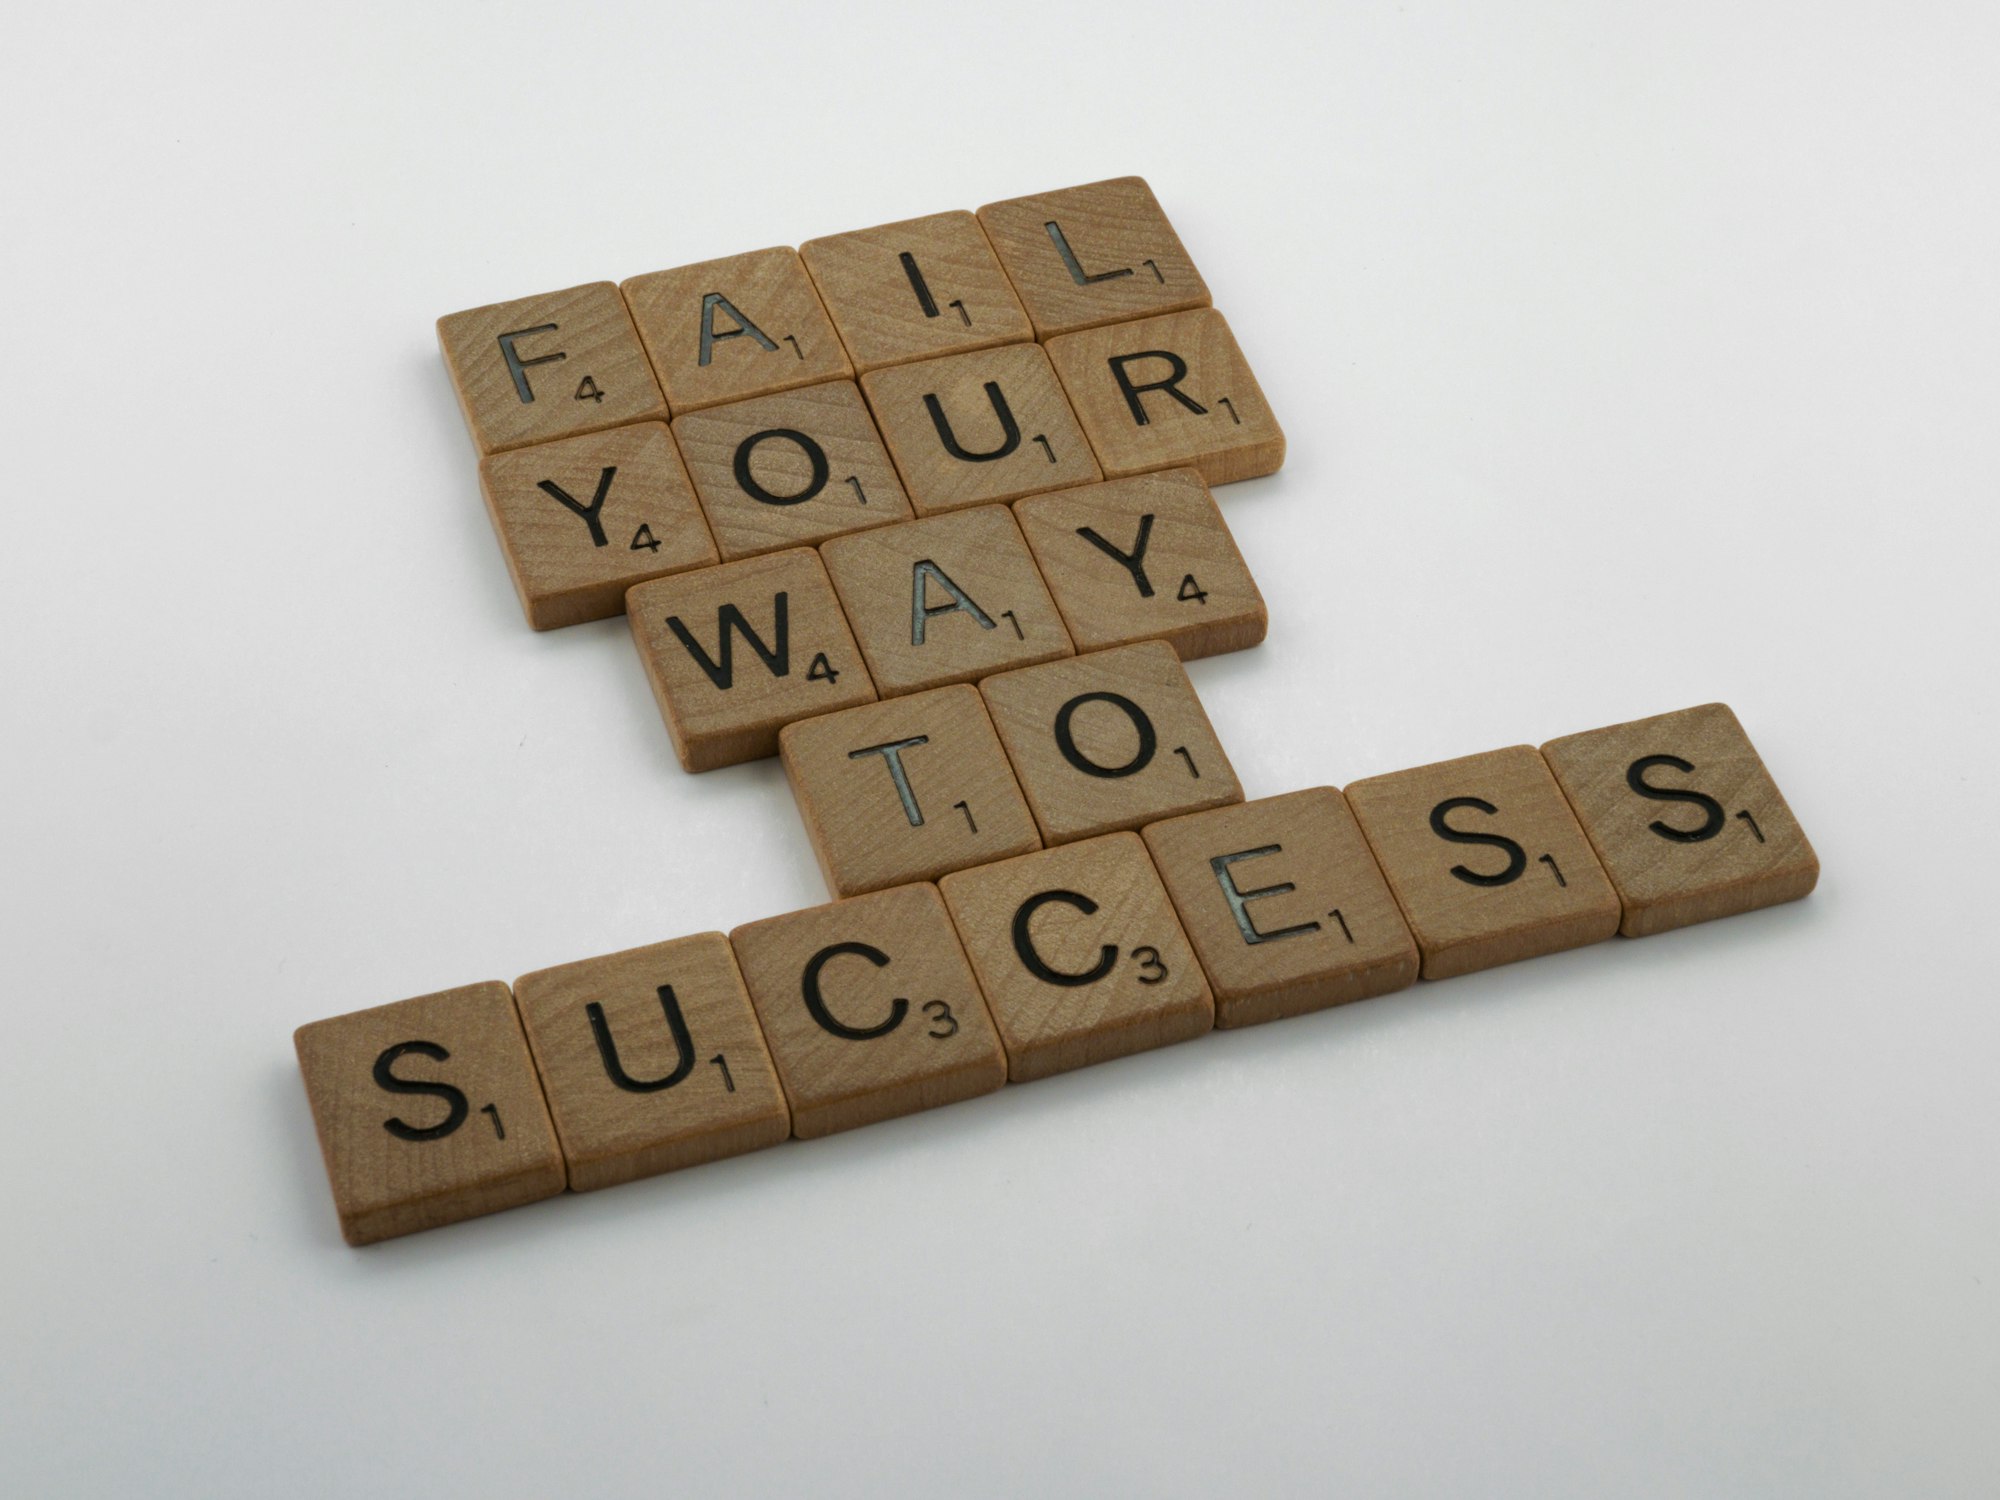 Scrabble pieces spelling out "fail your way to success".